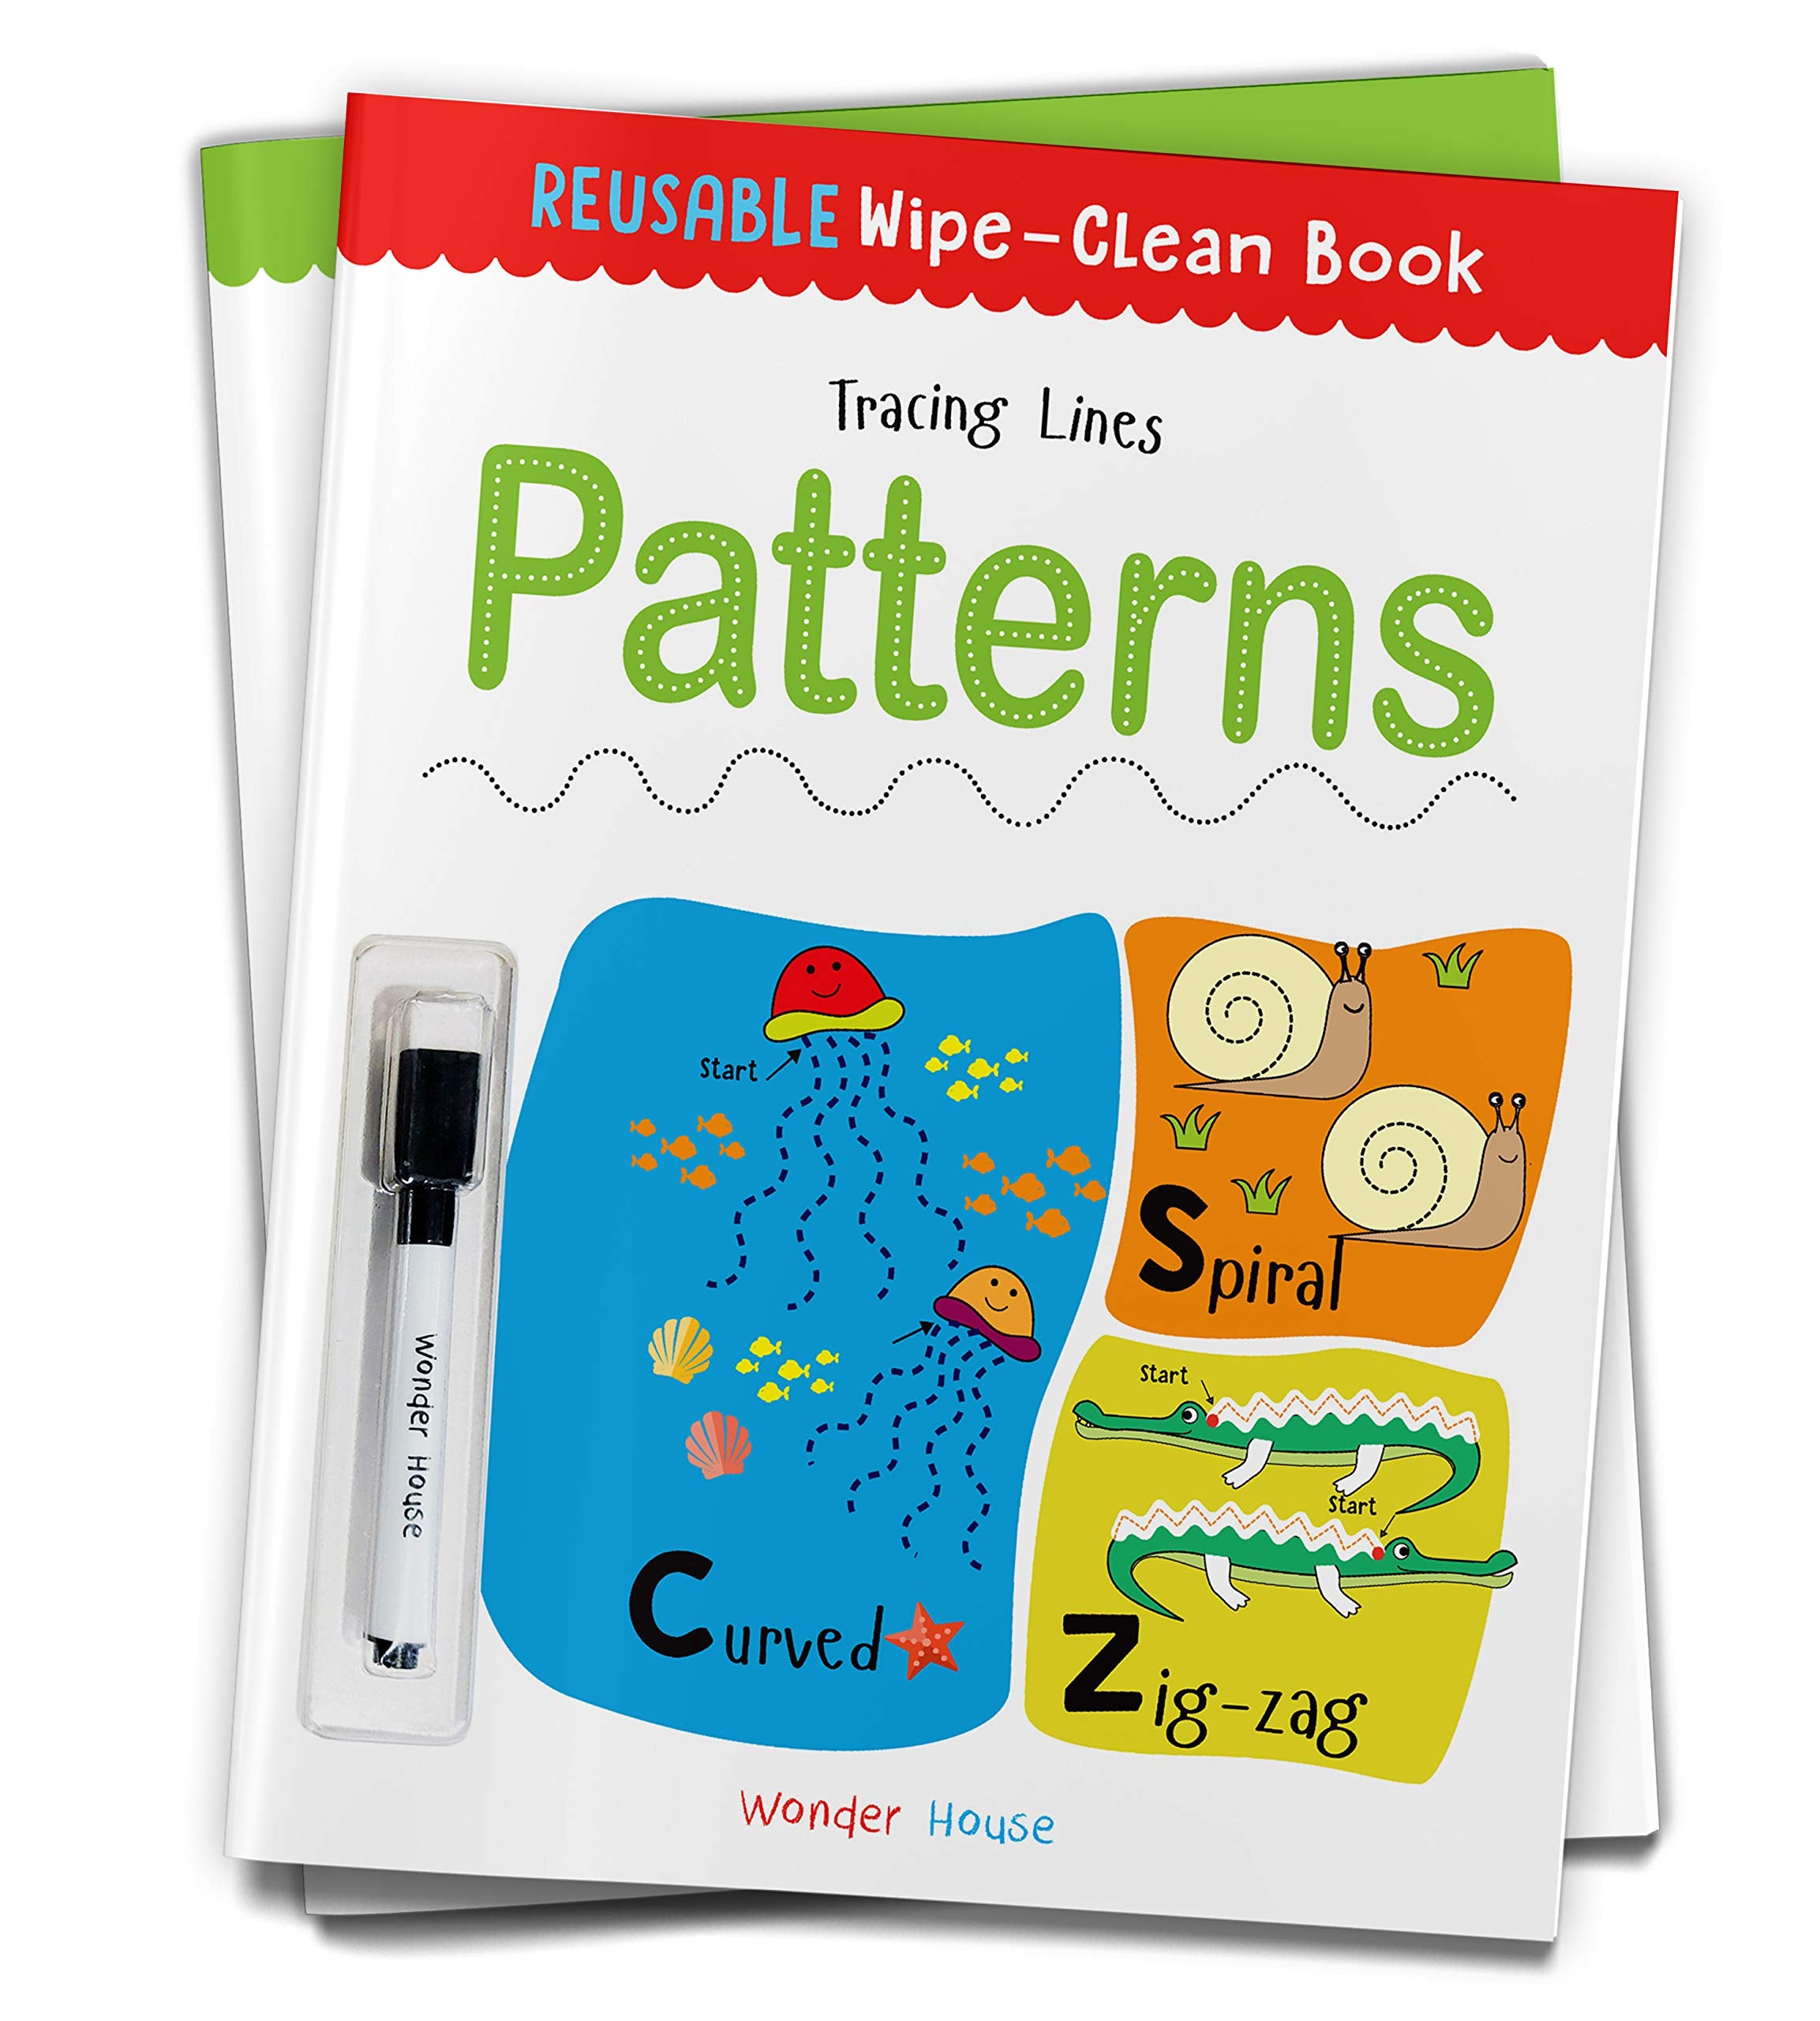 Patterns: Reusable Wipe And Clean Book Tracing Lines